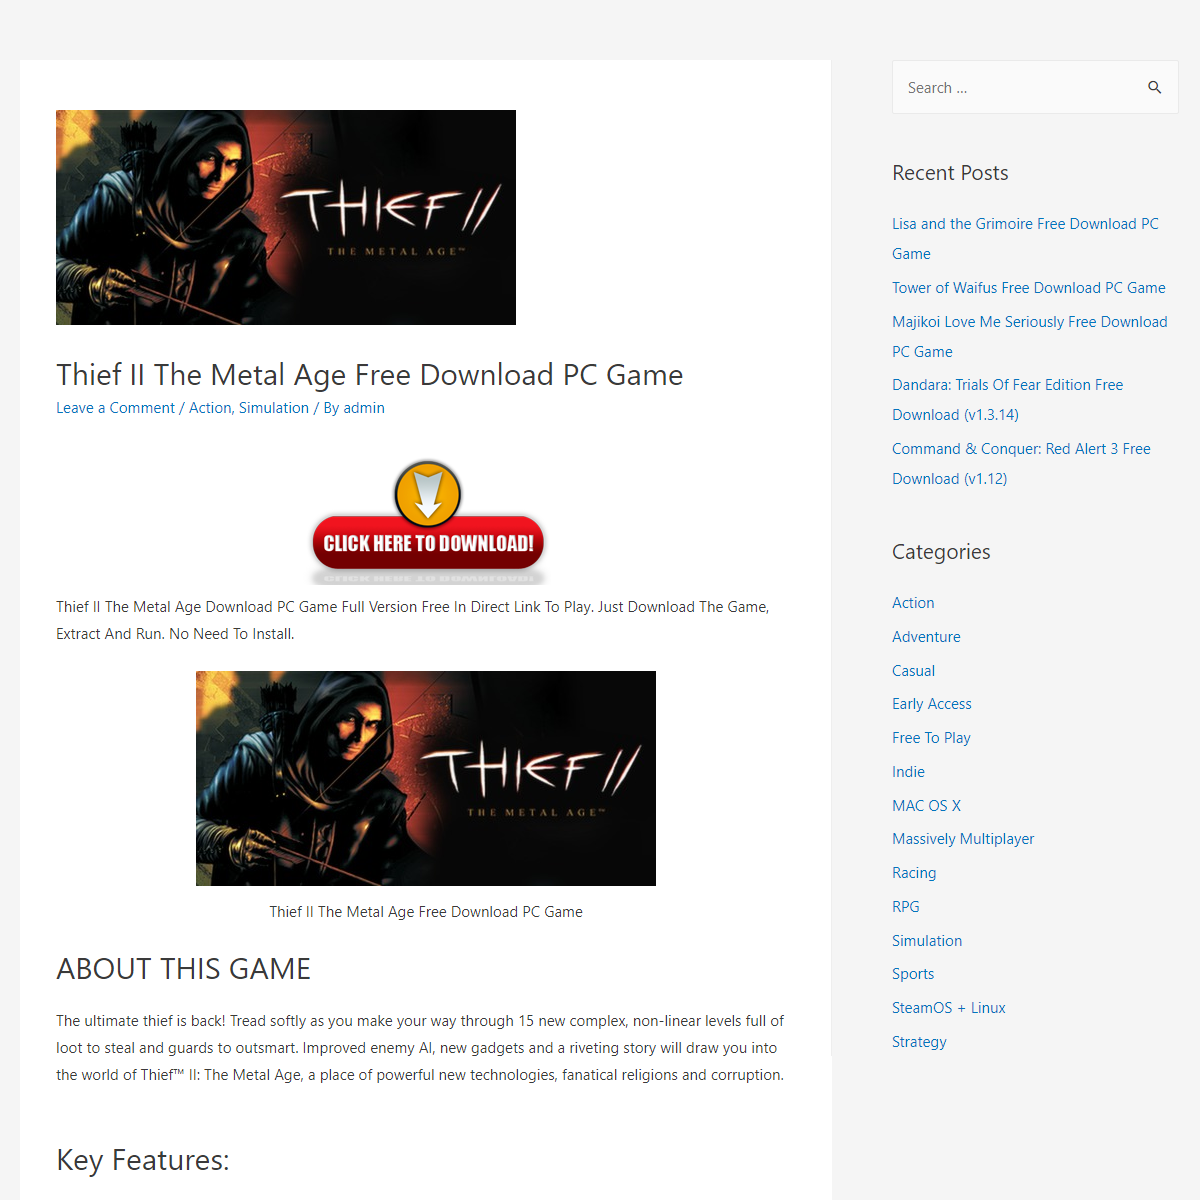 A complete backup of https://infinitelygaming.com/thief-ii-the-metal-age-free-download-pc-game/